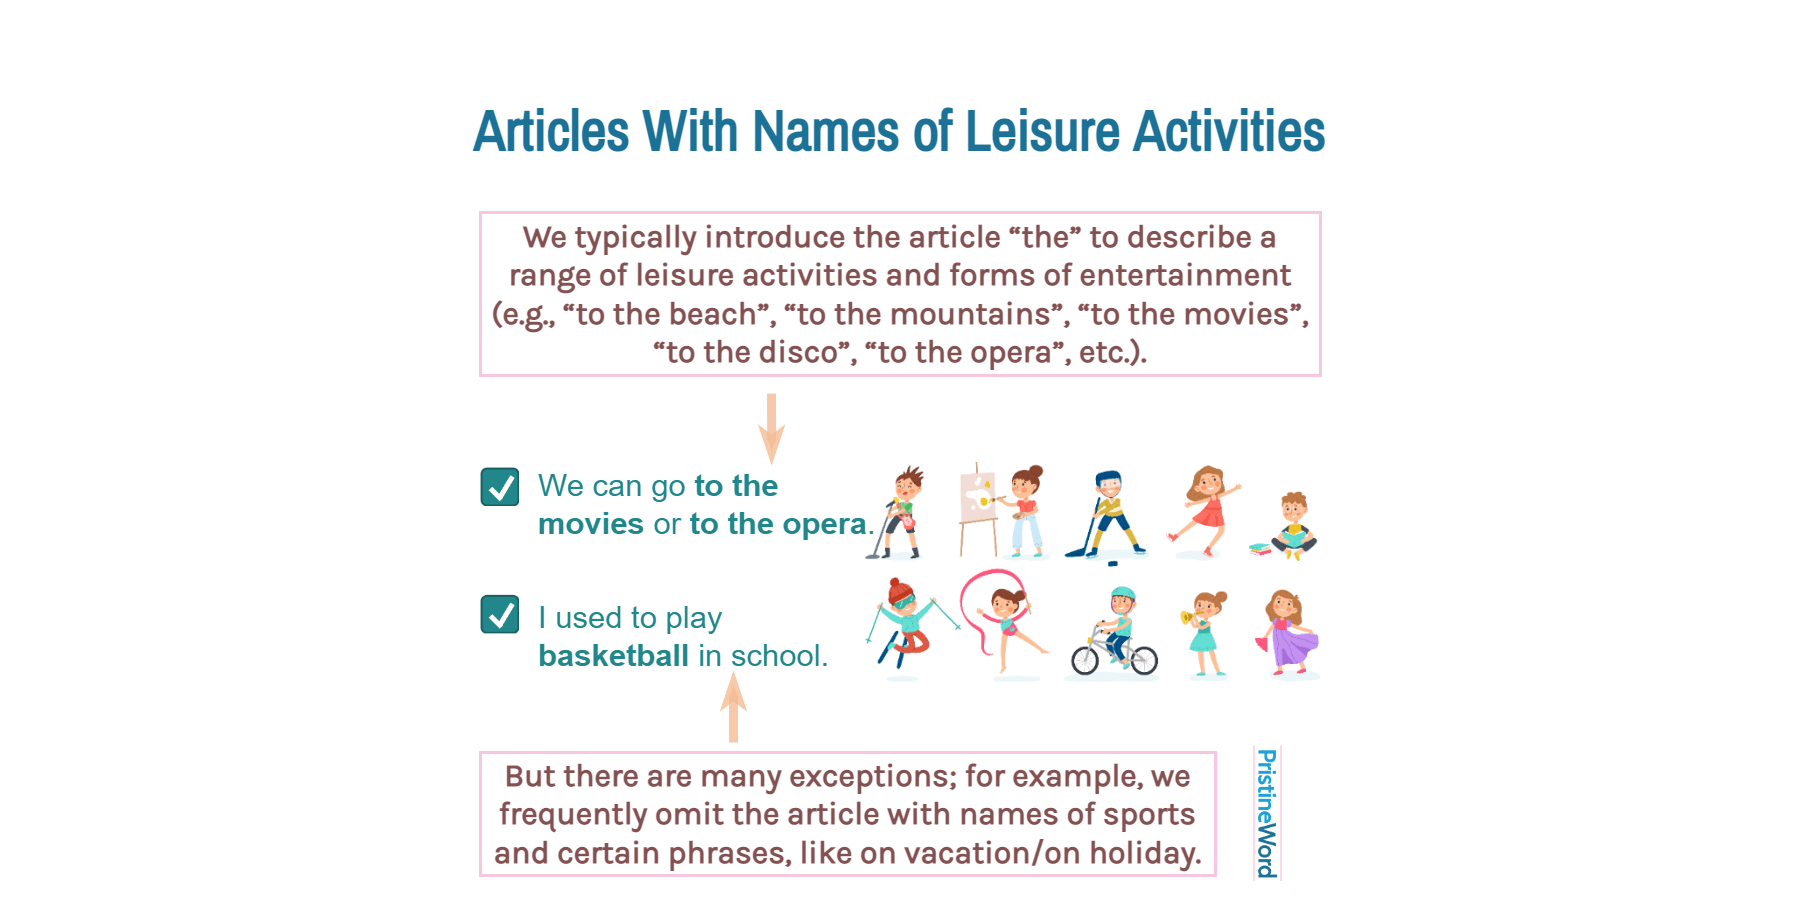 Articles With Names of Leisure Activities